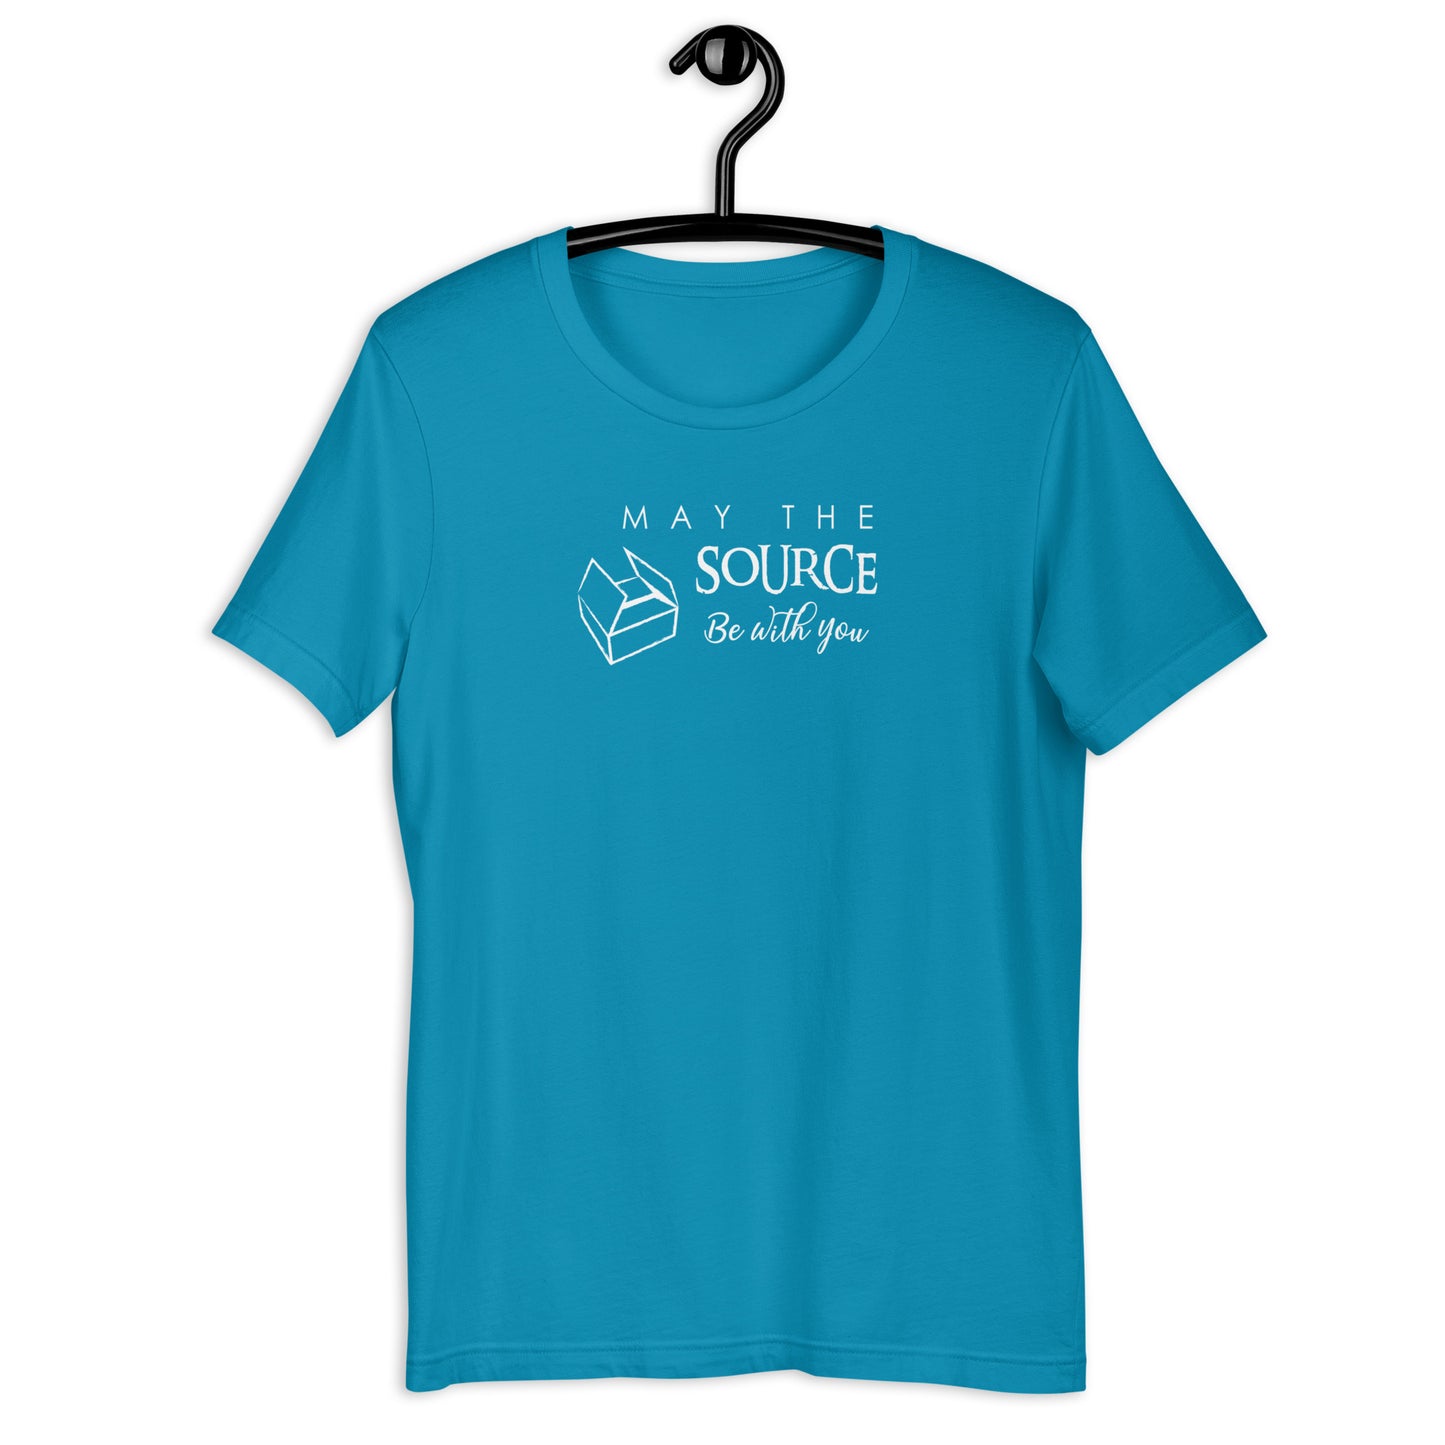 May the source be with you - Nosework - Unisex t-shirt